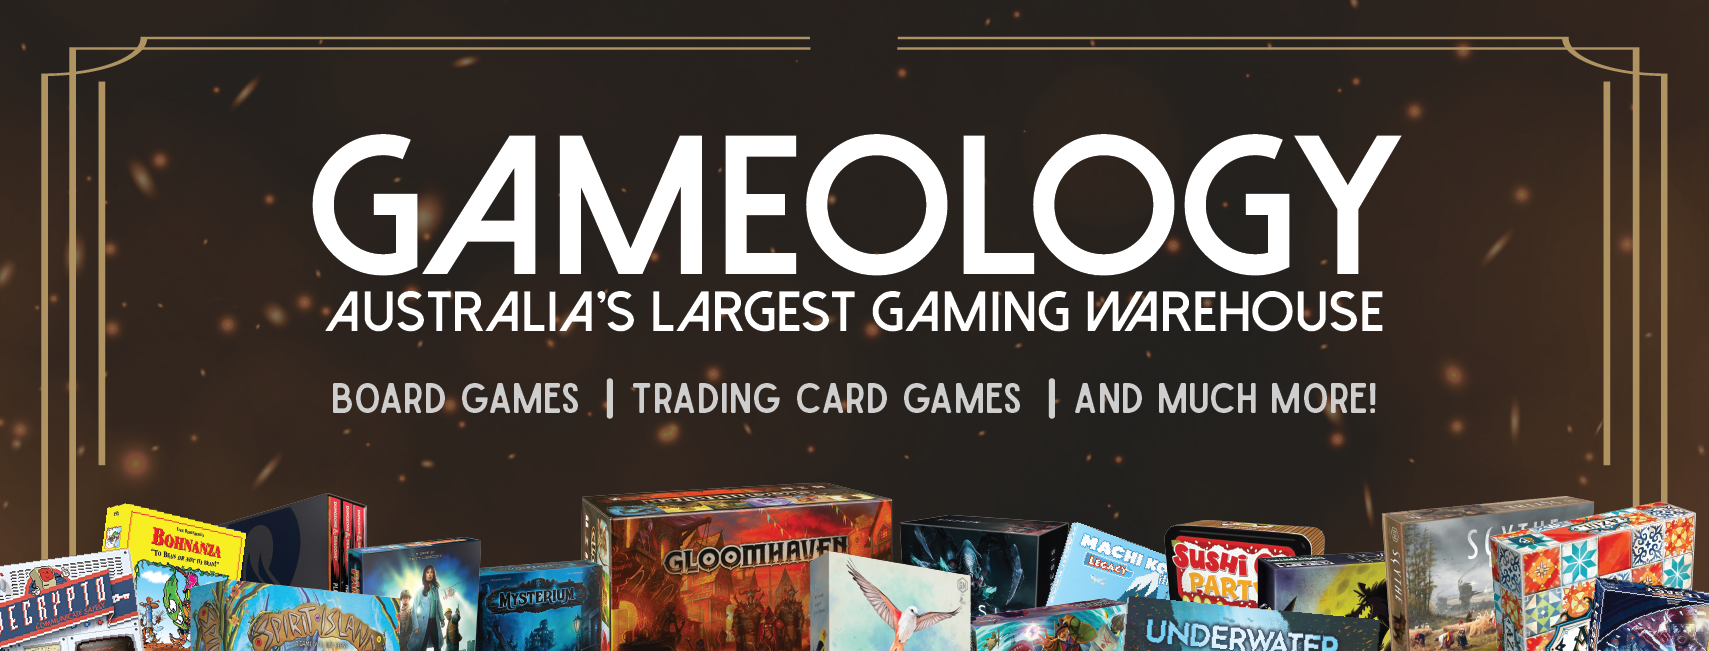 All Gameology Deals & Promotions